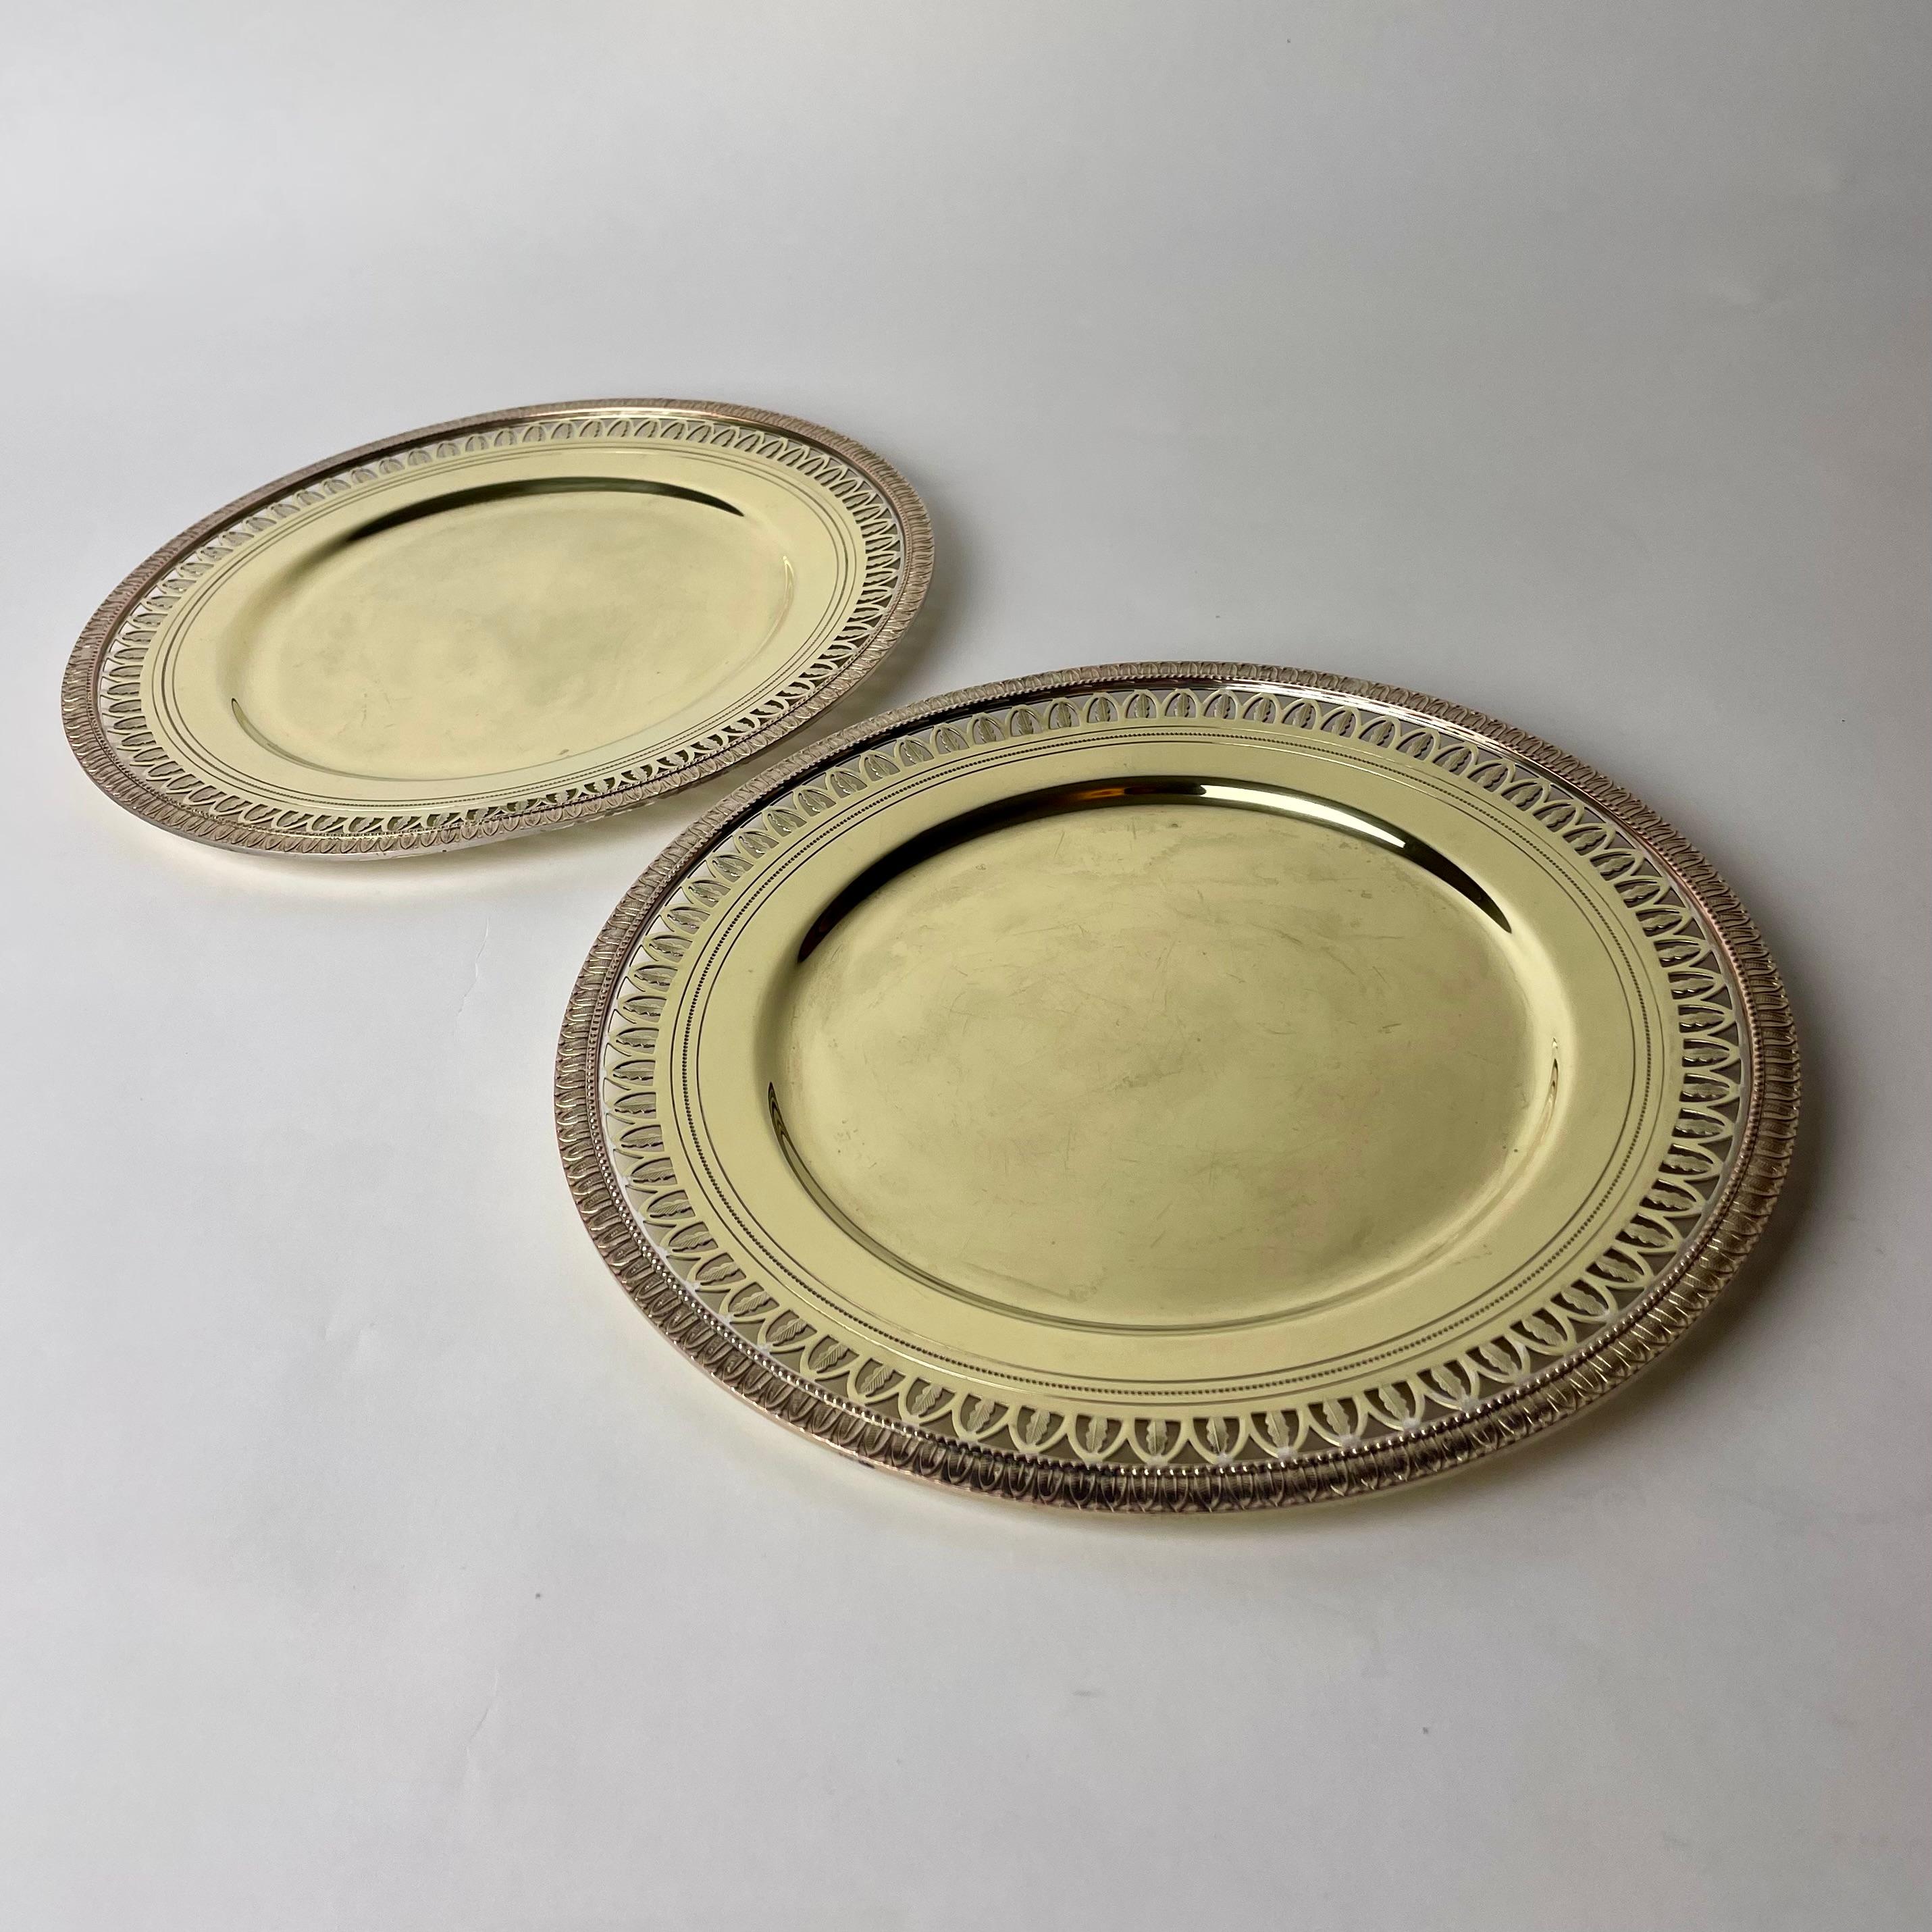 A pair of Elegant brass Platters in Empire style probably from the late 19th Century or early 20th Century. Beautiful empire decorations with openwork edge.

Wear consistent with age and use 